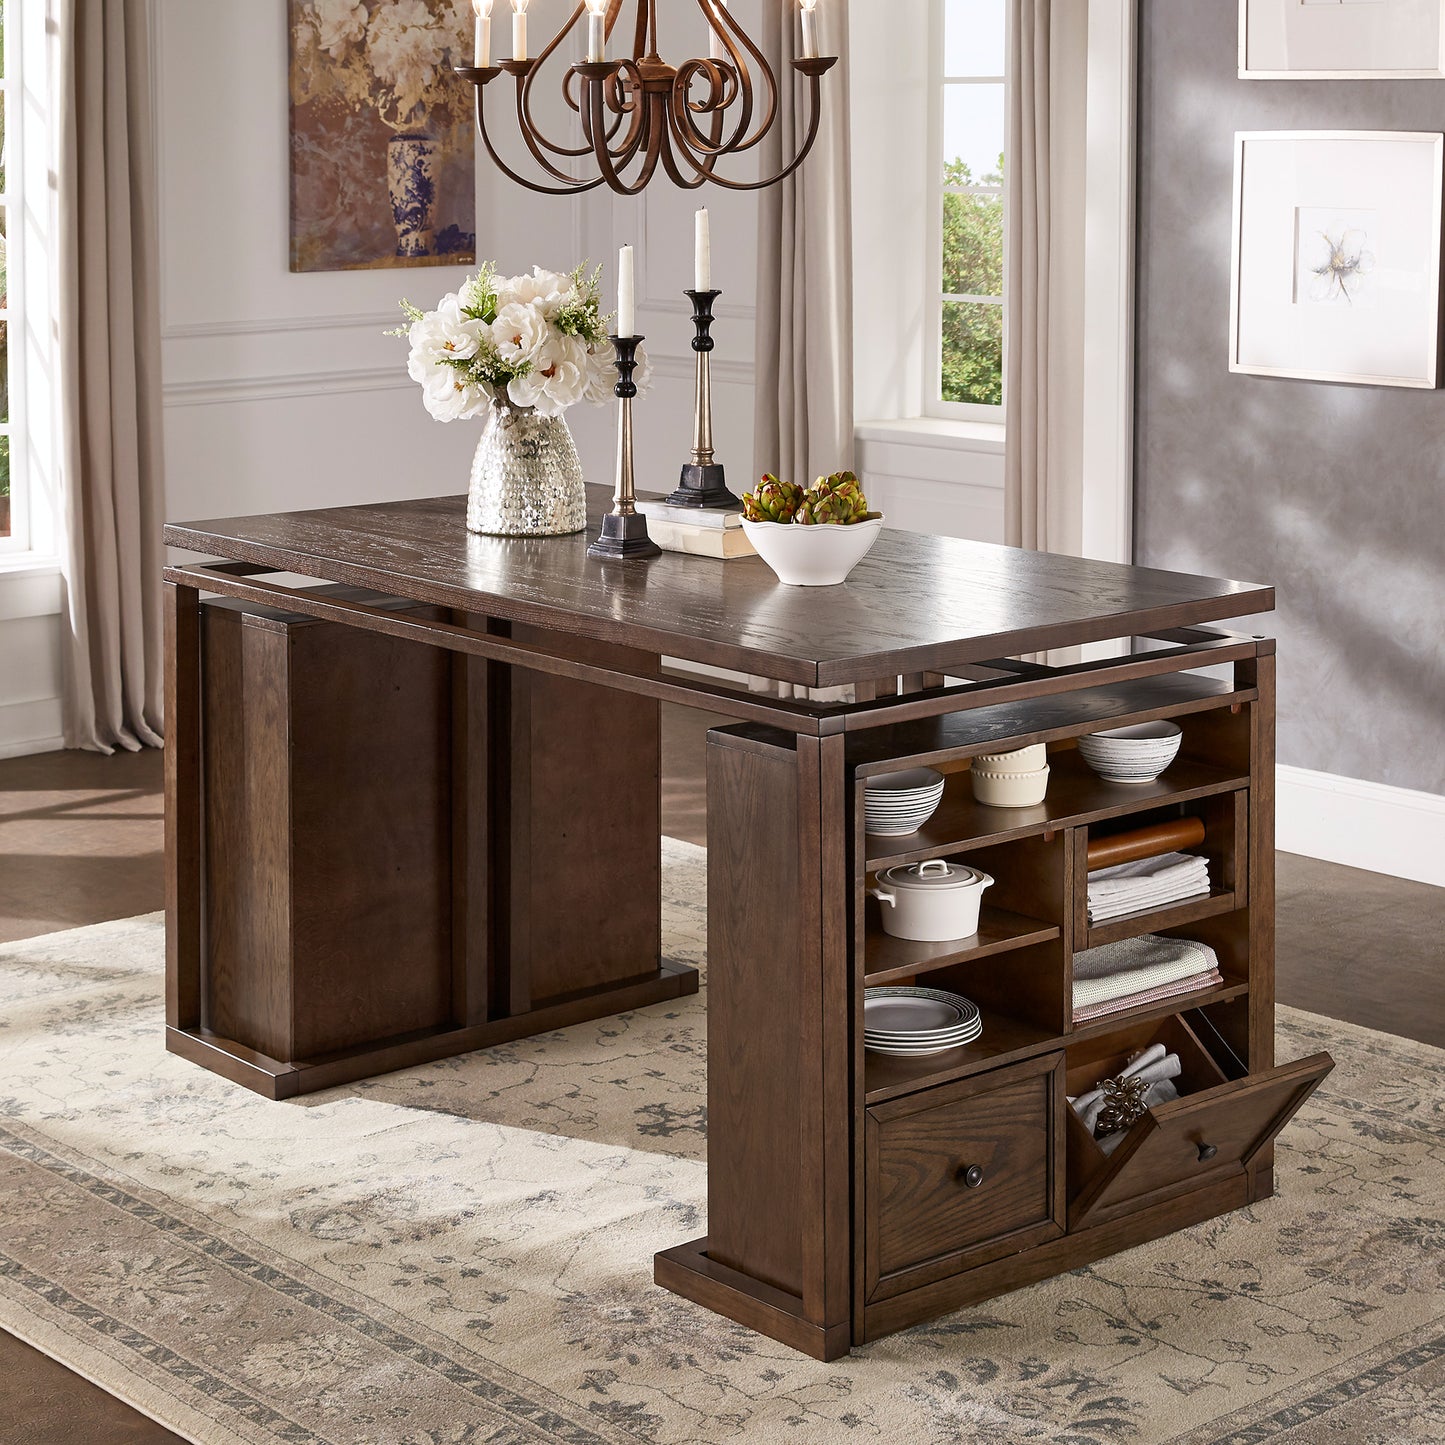 Rectangular Counter Height Dining Table - With Wine and Storage Cabinets